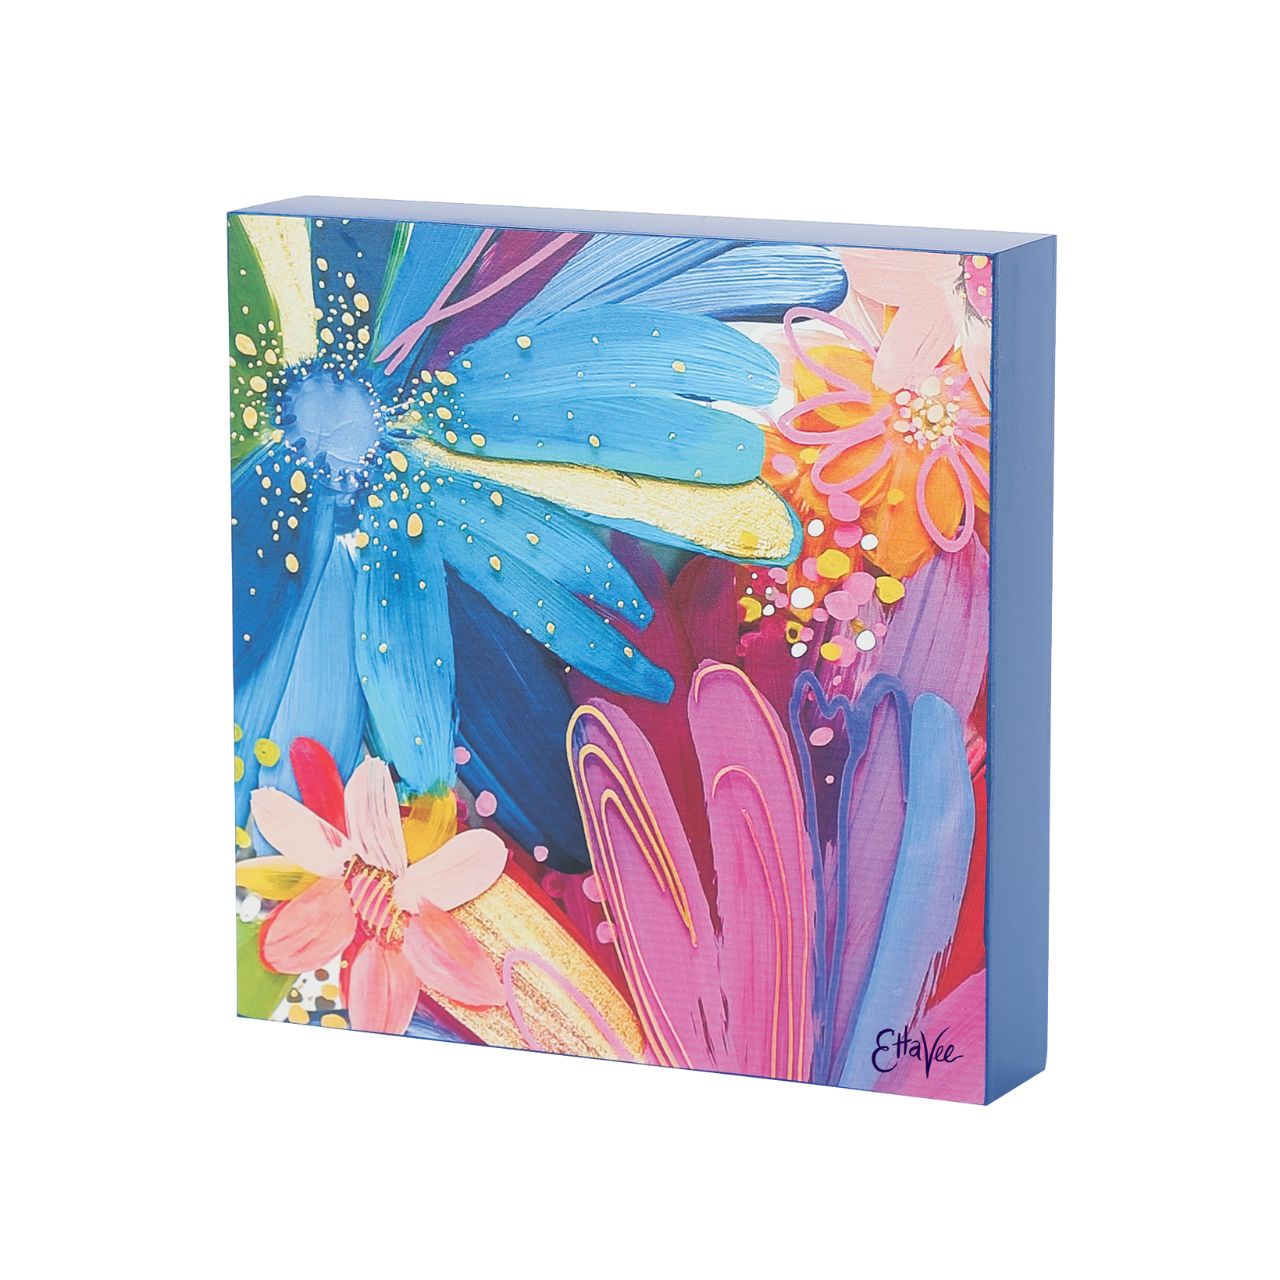 Medium Jessi's Garden Wall Art by Etta Vee  Artist, designer and art influencer, Jessi Raulet, is known for her colourful and bold designs. Add some good vibes to your space with this wall art. This can be freestanding on a desk or shelf and also has option for wall hanging.